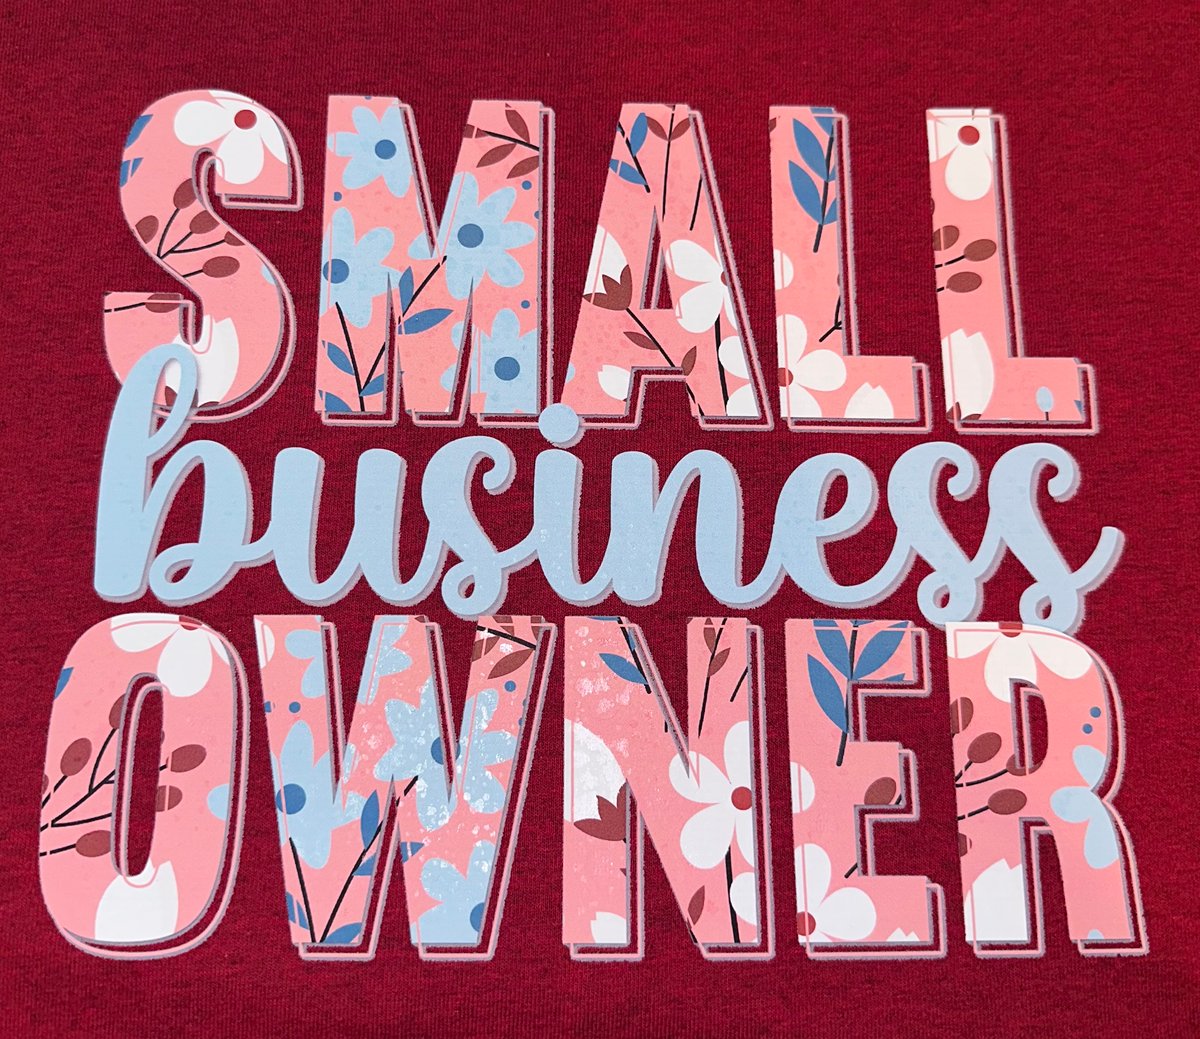 Image of "Small Business Owner" Tee